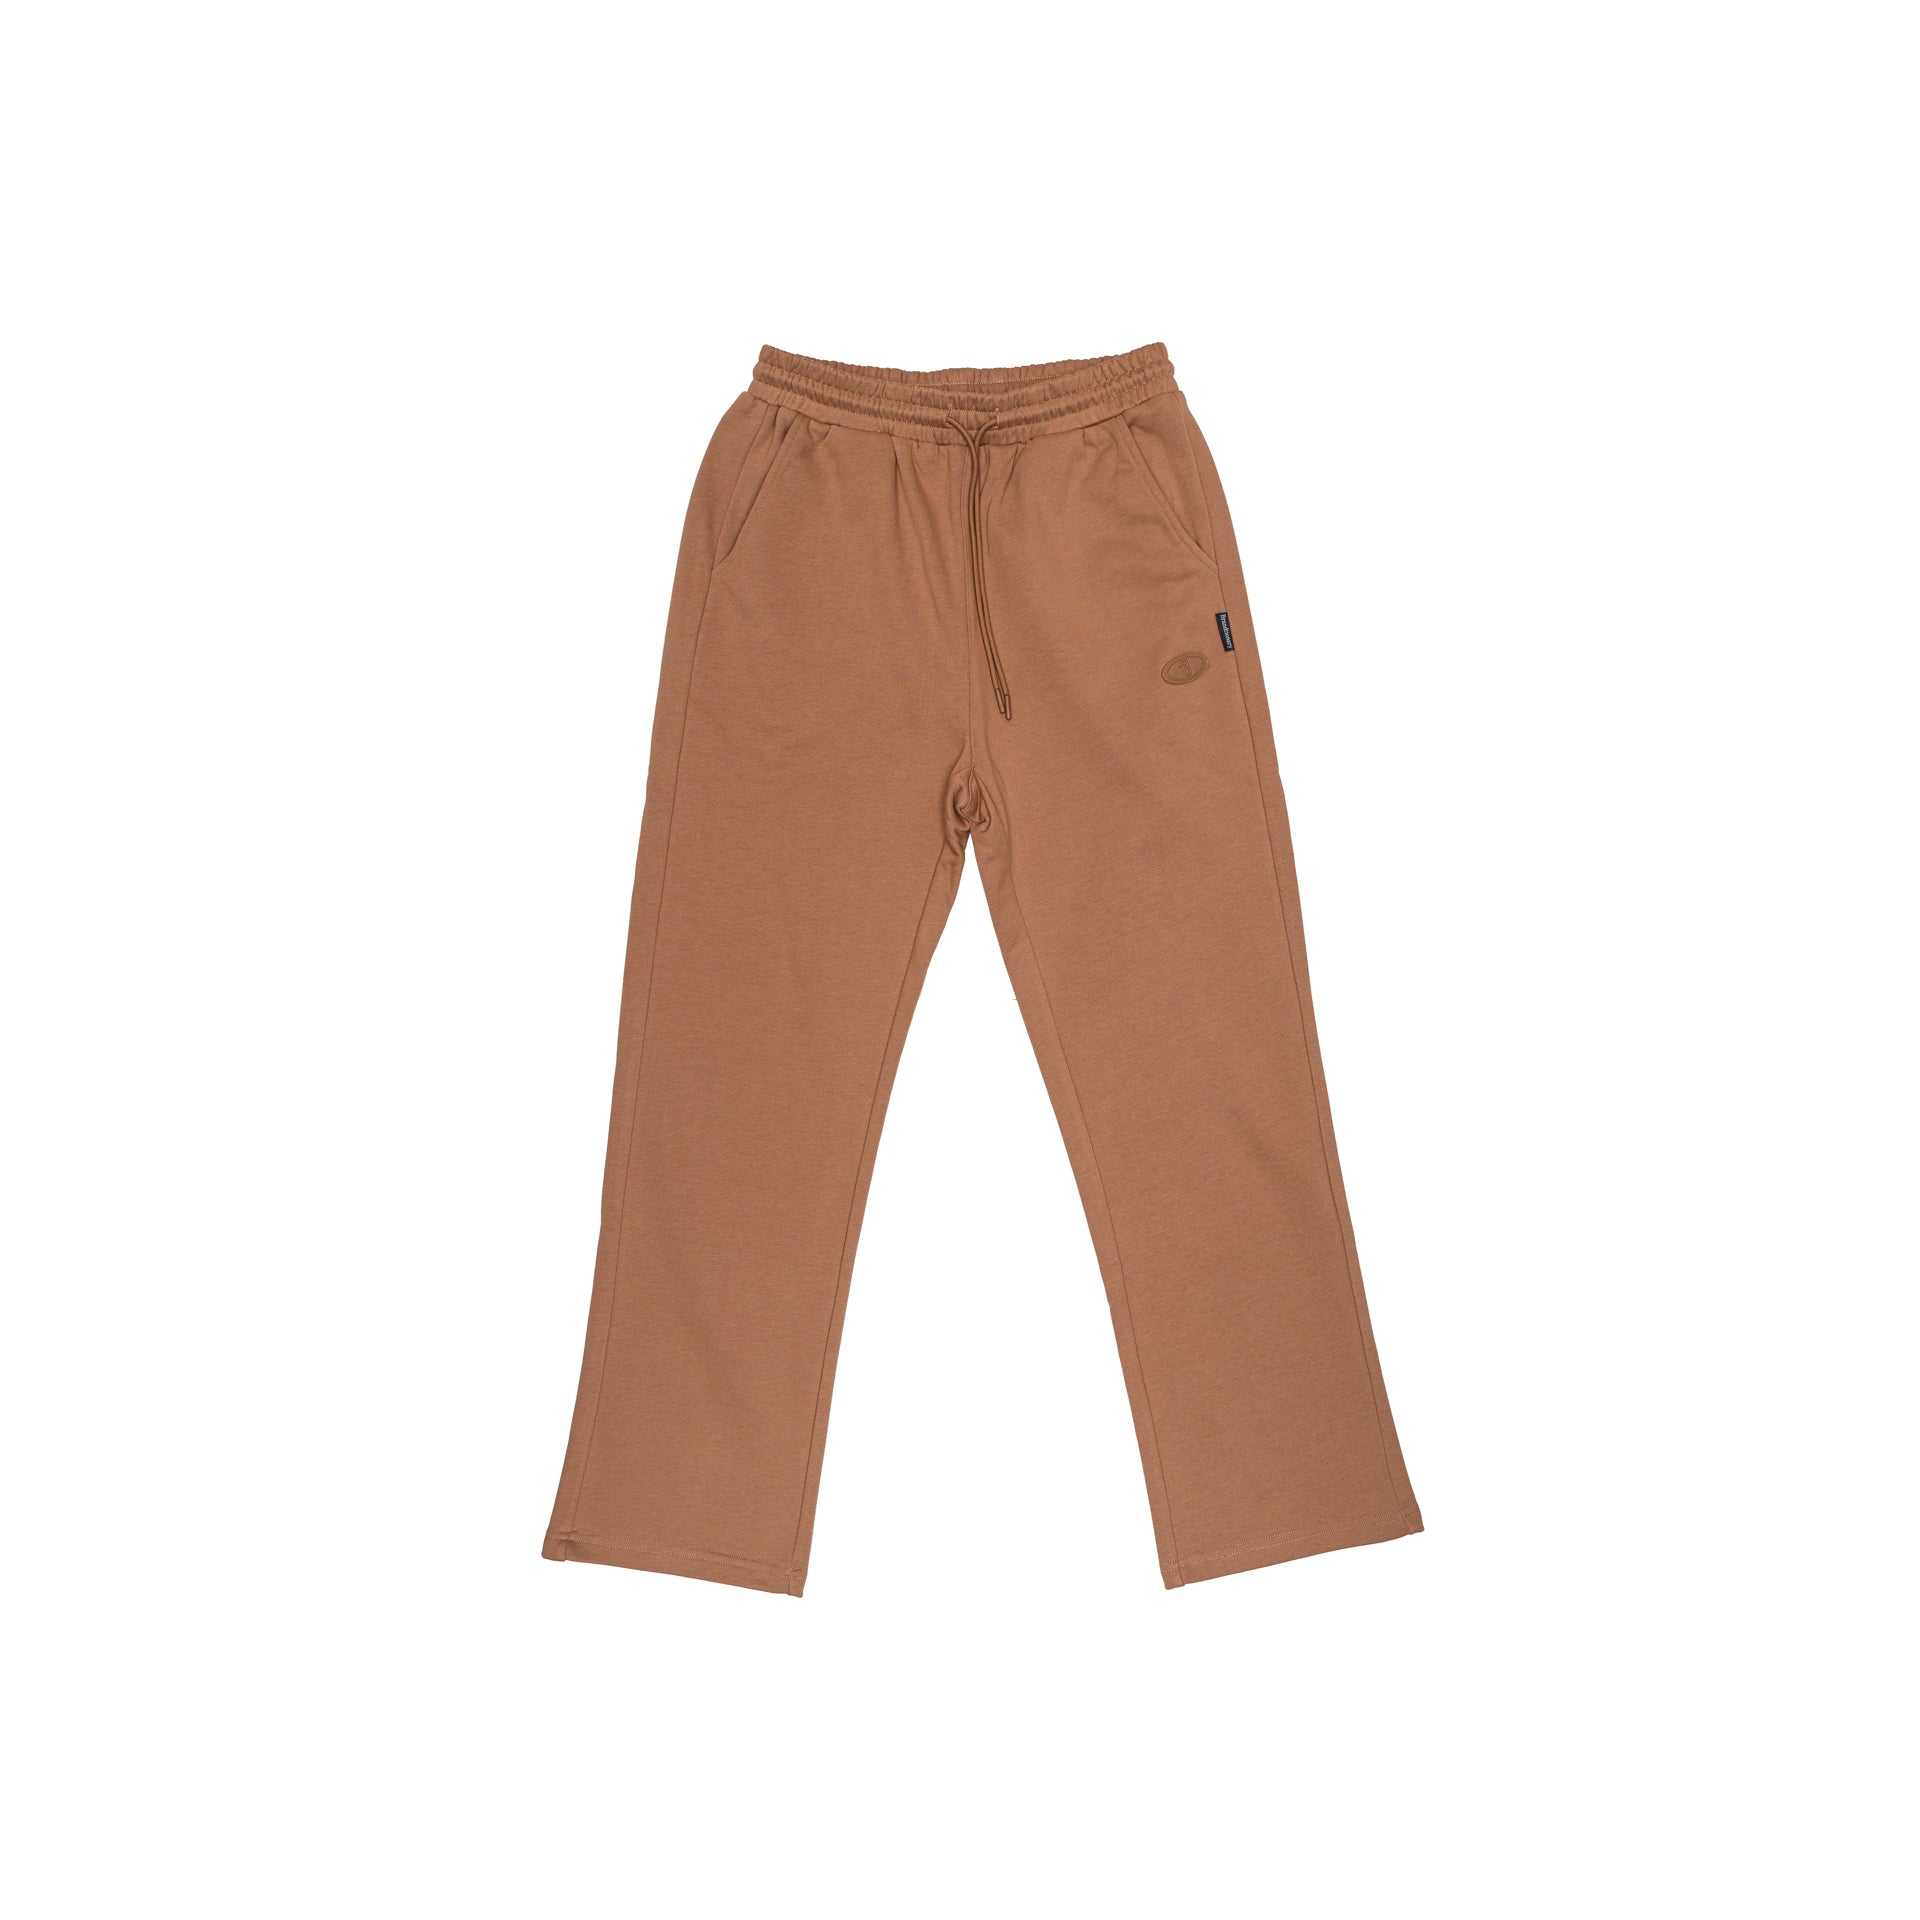 Brown Cotton Sweatpants by Brandtionary